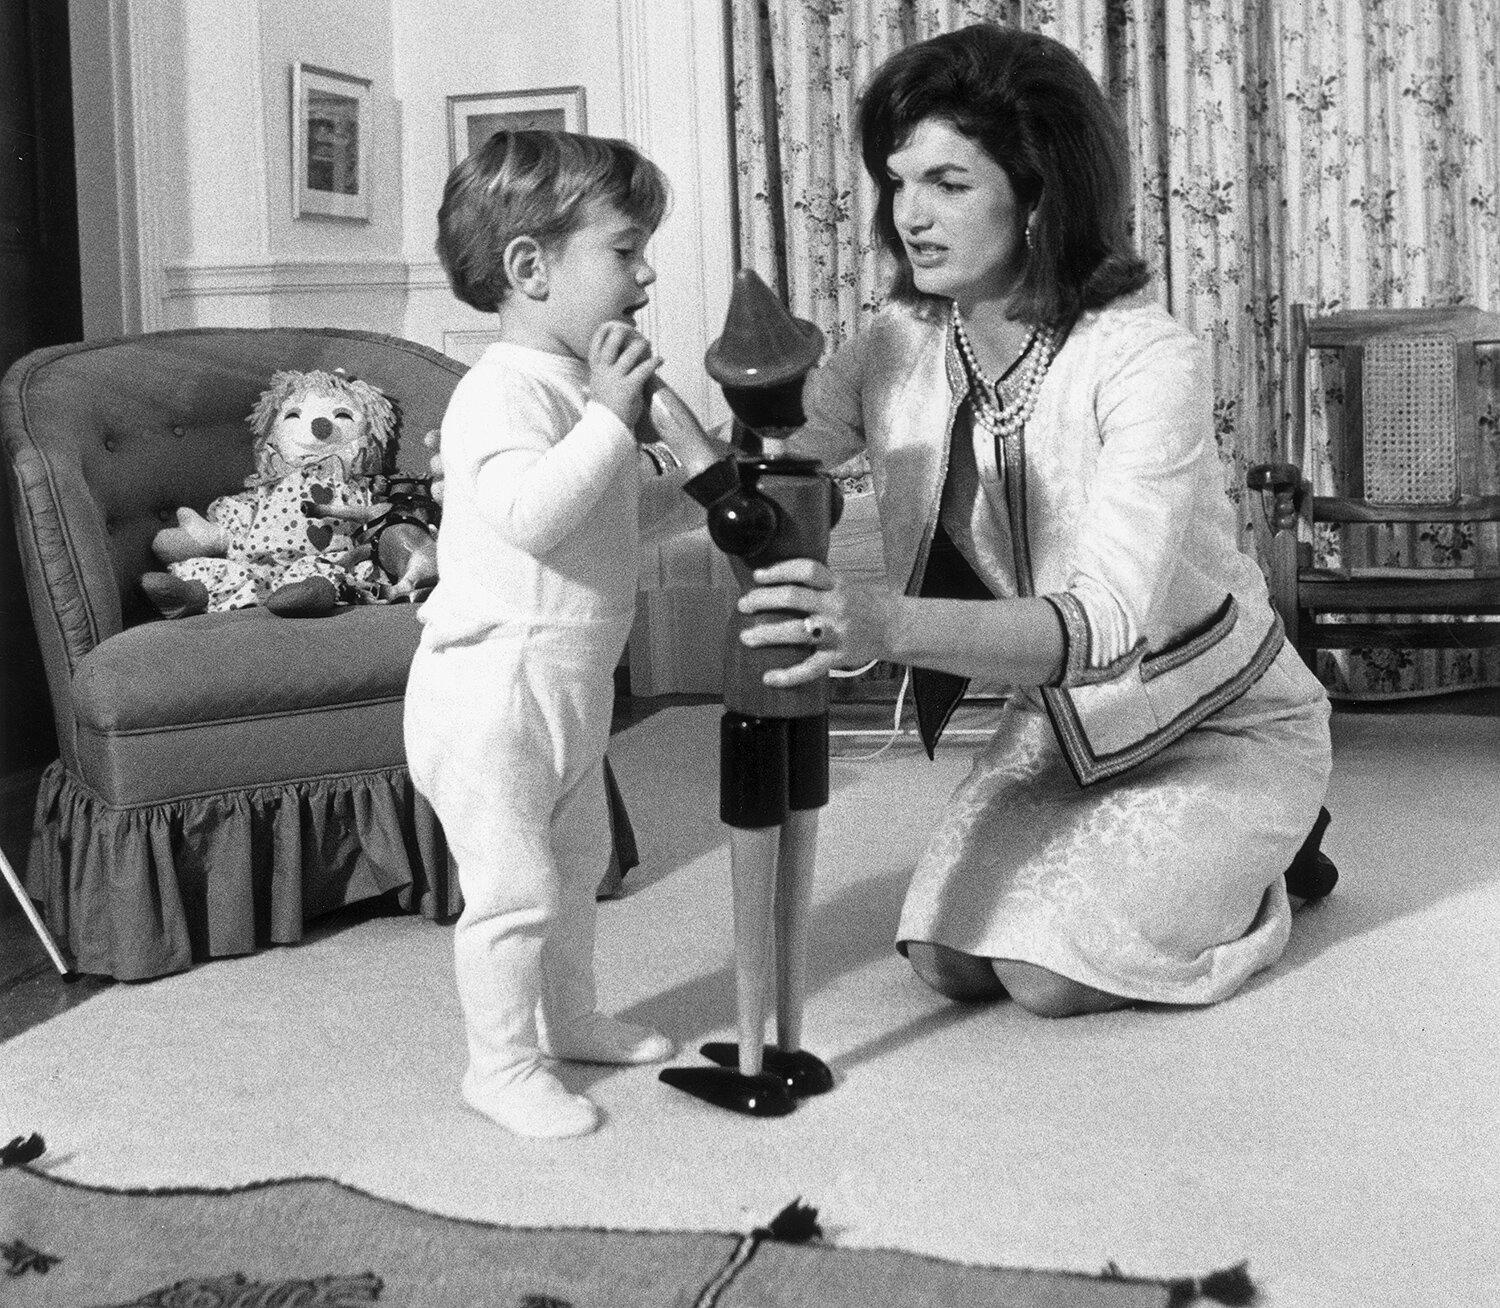 Jackie Kennedy S Secret Service Agent Remembers Jfk Jr S Birth And White House Childhood